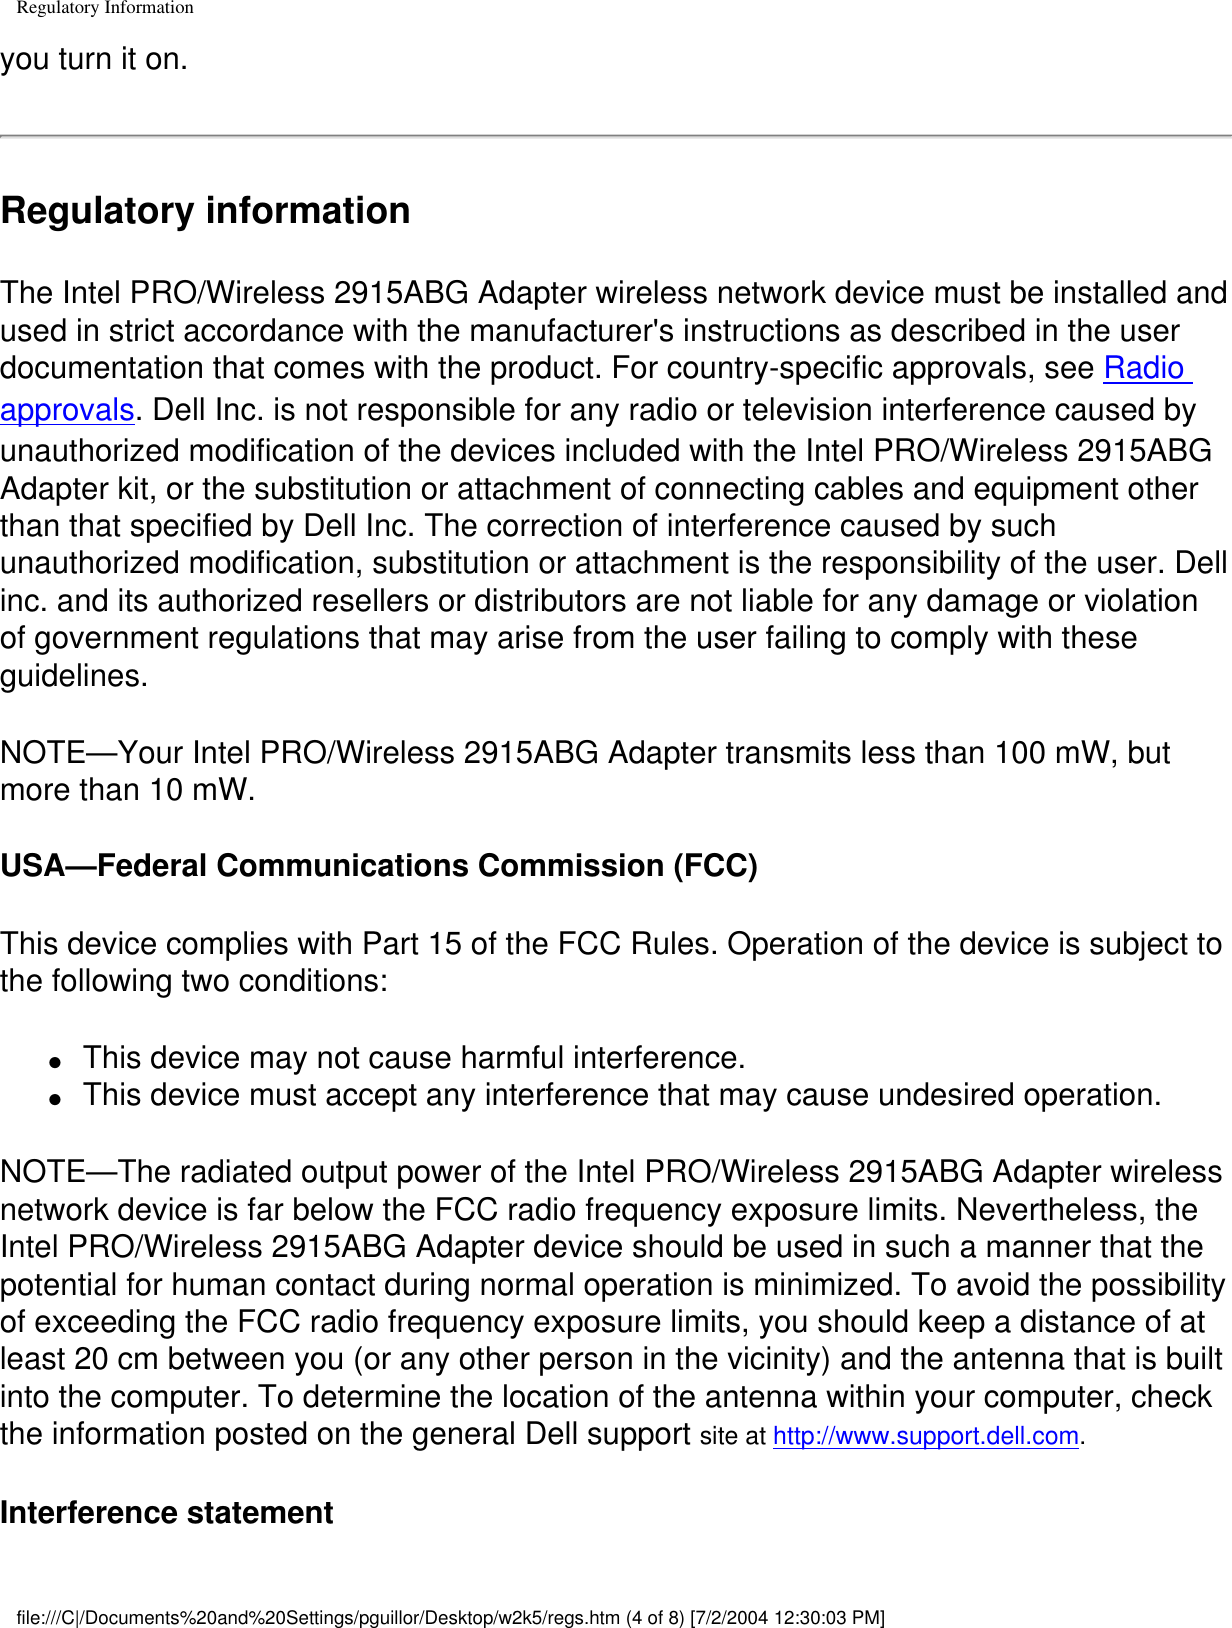 Regulatory Informationyou turn it on.Regulatory informationThe Intel PRO/Wireless 2915ABG Adapter wireless network device must be installed and used in strict accordance with the manufacturer&apos;s instructions as described in the user documentation that comes with the product. For country-specific approvals, see Radio approvals. Dell Inc. is not responsible for any radio or television interference caused by unauthorized modification of the devices included with the Intel PRO/Wireless 2915ABG Adapter kit, or the substitution or attachment of connecting cables and equipment other than that specified by Dell Inc. The correction of interference caused by such unauthorized modification, substitution or attachment is the responsibility of the user. Dell inc. and its authorized resellers or distributors are not liable for any damage or violation of government regulations that may arise from the user failing to comply with these guidelines.NOTE—Your Intel PRO/Wireless 2915ABG Adapter transmits less than 100 mW, but more than 10 mW.USA—Federal Communications Commission (FCC)This device complies with Part 15 of the FCC Rules. Operation of the device is subject to the following two conditions:●     This device may not cause harmful interference.●     This device must accept any interference that may cause undesired operation.NOTE—The radiated output power of the Intel PRO/Wireless 2915ABG Adapter wireless network device is far below the FCC radio frequency exposure limits. Nevertheless, the Intel PRO/Wireless 2915ABG Adapter device should be used in such a manner that the potential for human contact during normal operation is minimized. To avoid the possibility of exceeding the FCC radio frequency exposure limits, you should keep a distance of at least 20 cm between you (or any other person in the vicinity) and the antenna that is built into the computer. To determine the location of the antenna within your computer, check the information posted on the general Dell support site at http://www.support.dell.com.Interference statementfile:///C|/Documents%20and%20Settings/pguillor/Desktop/w2k5/regs.htm (4 of 8) [7/2/2004 12:30:03 PM]